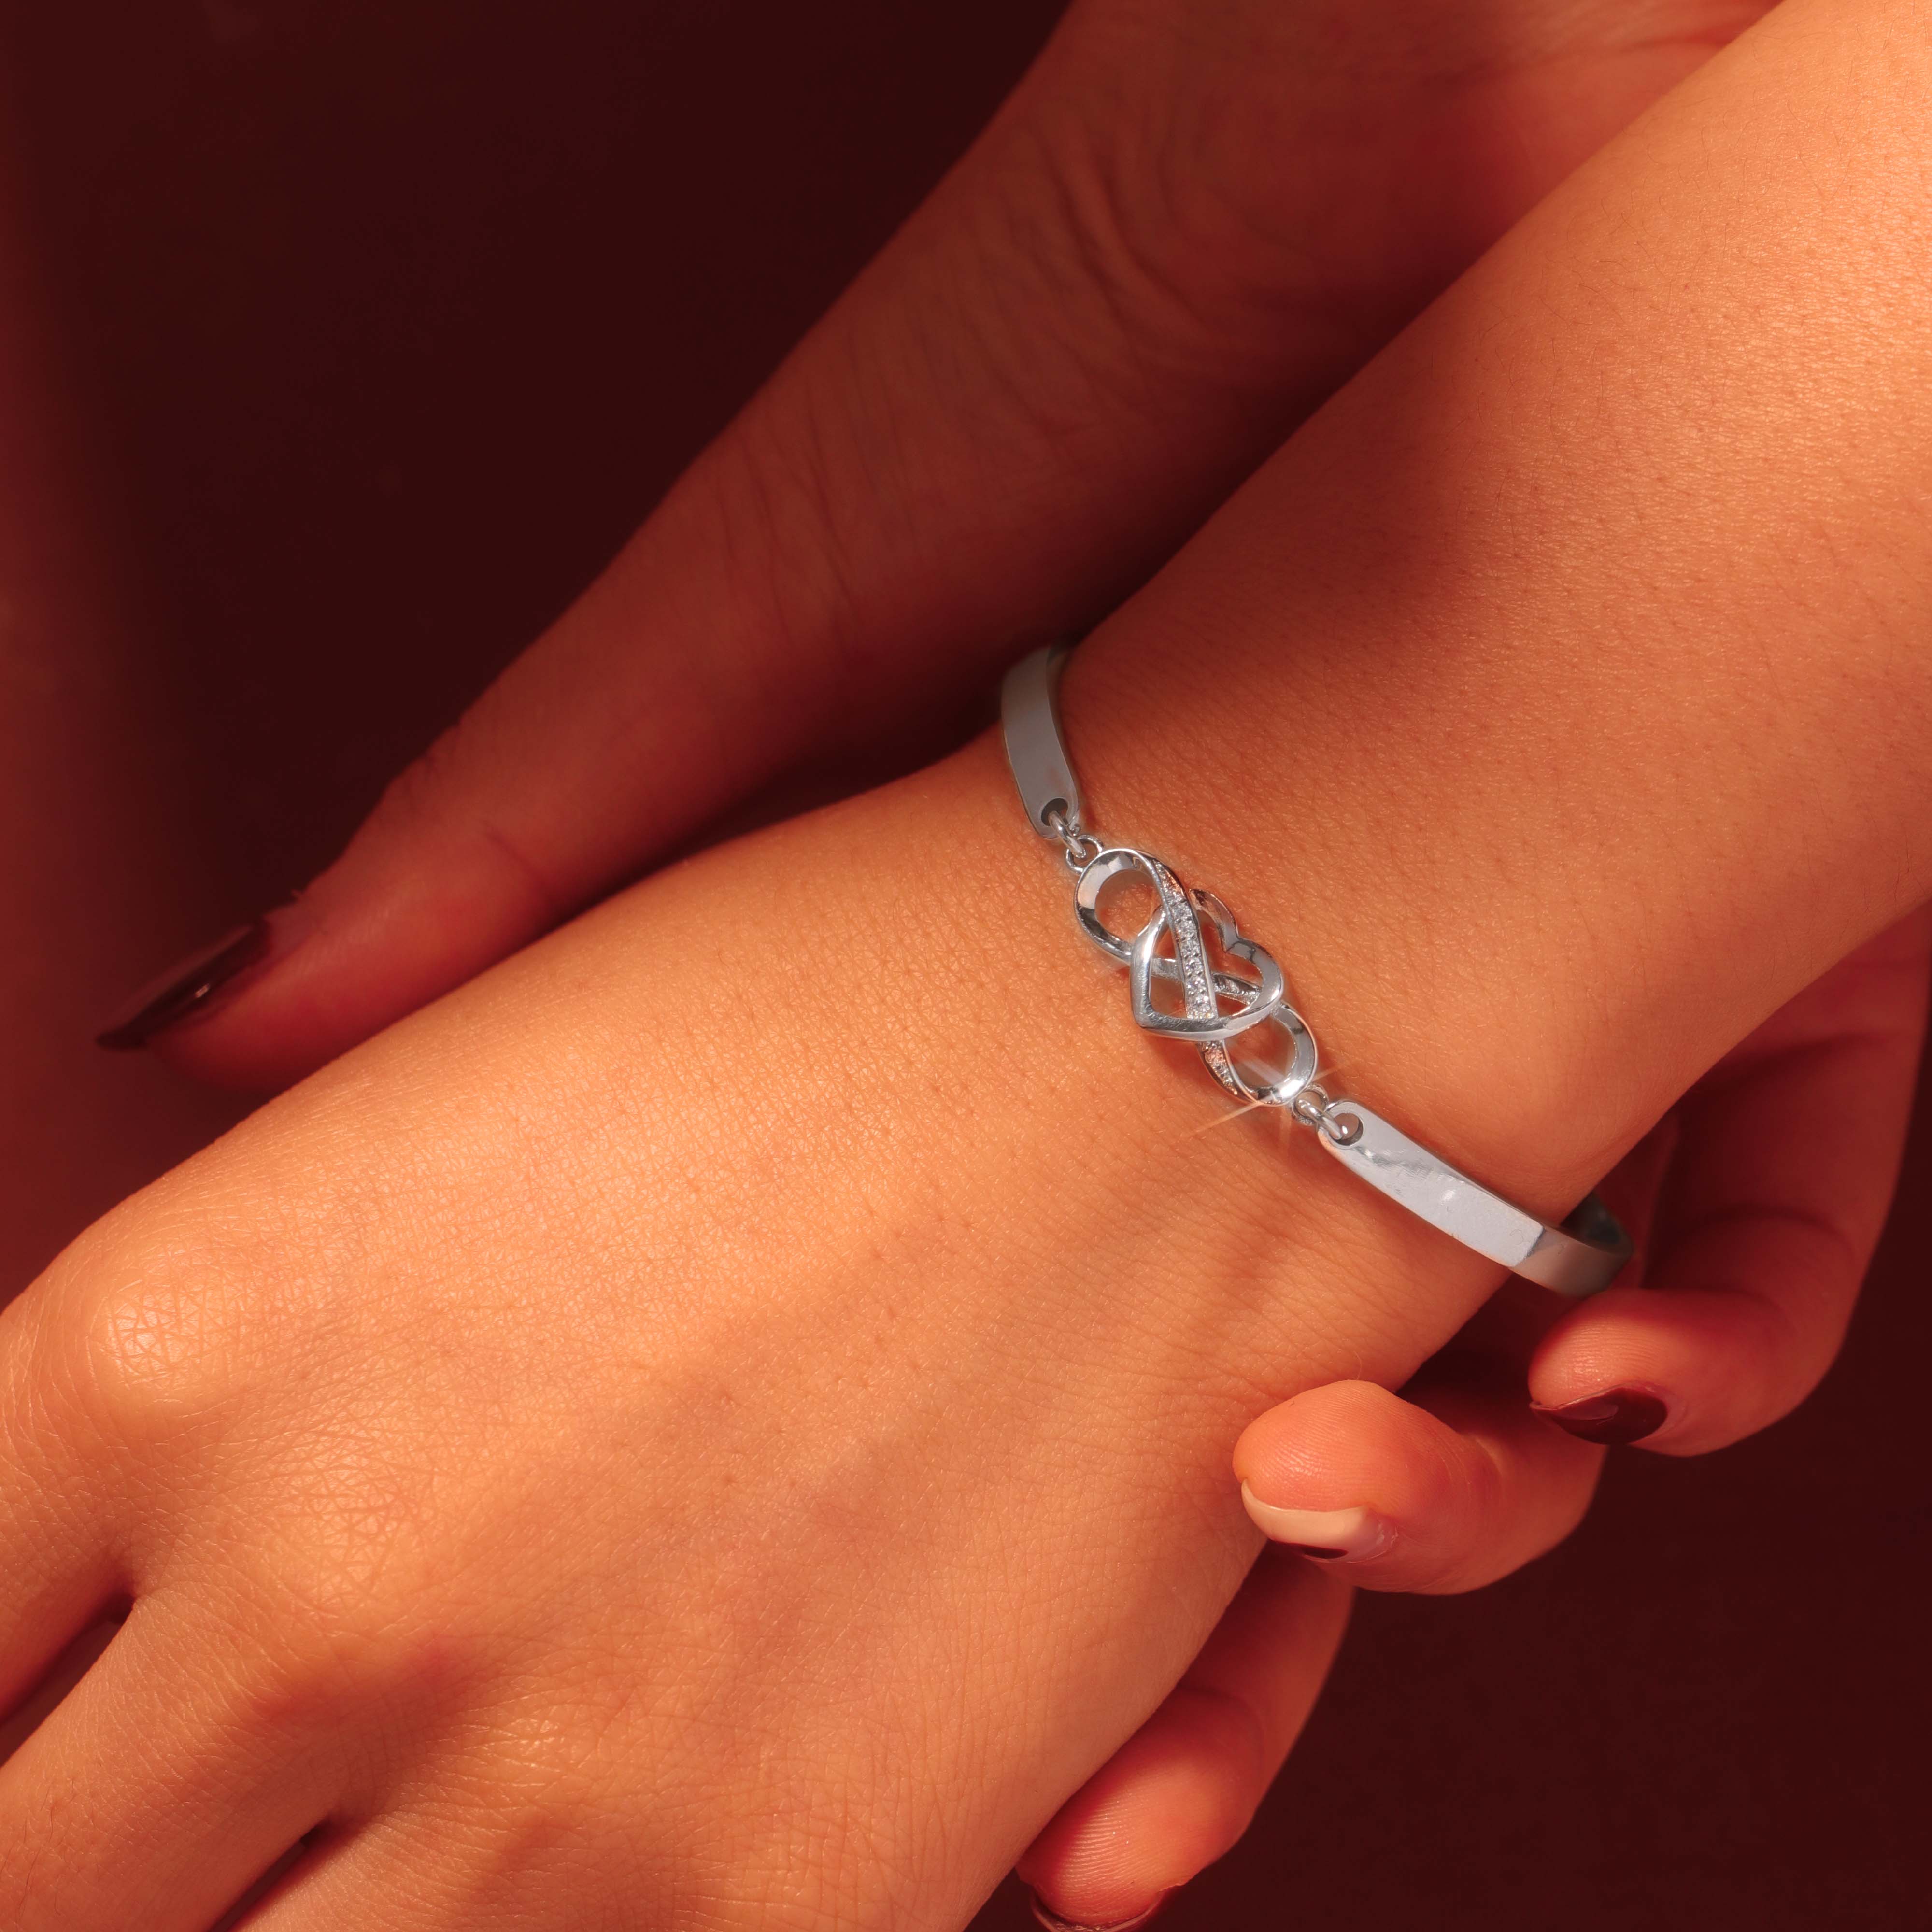 For Friend - Not Sisters By Blood But Sisters By Heart Infinity Bracelet